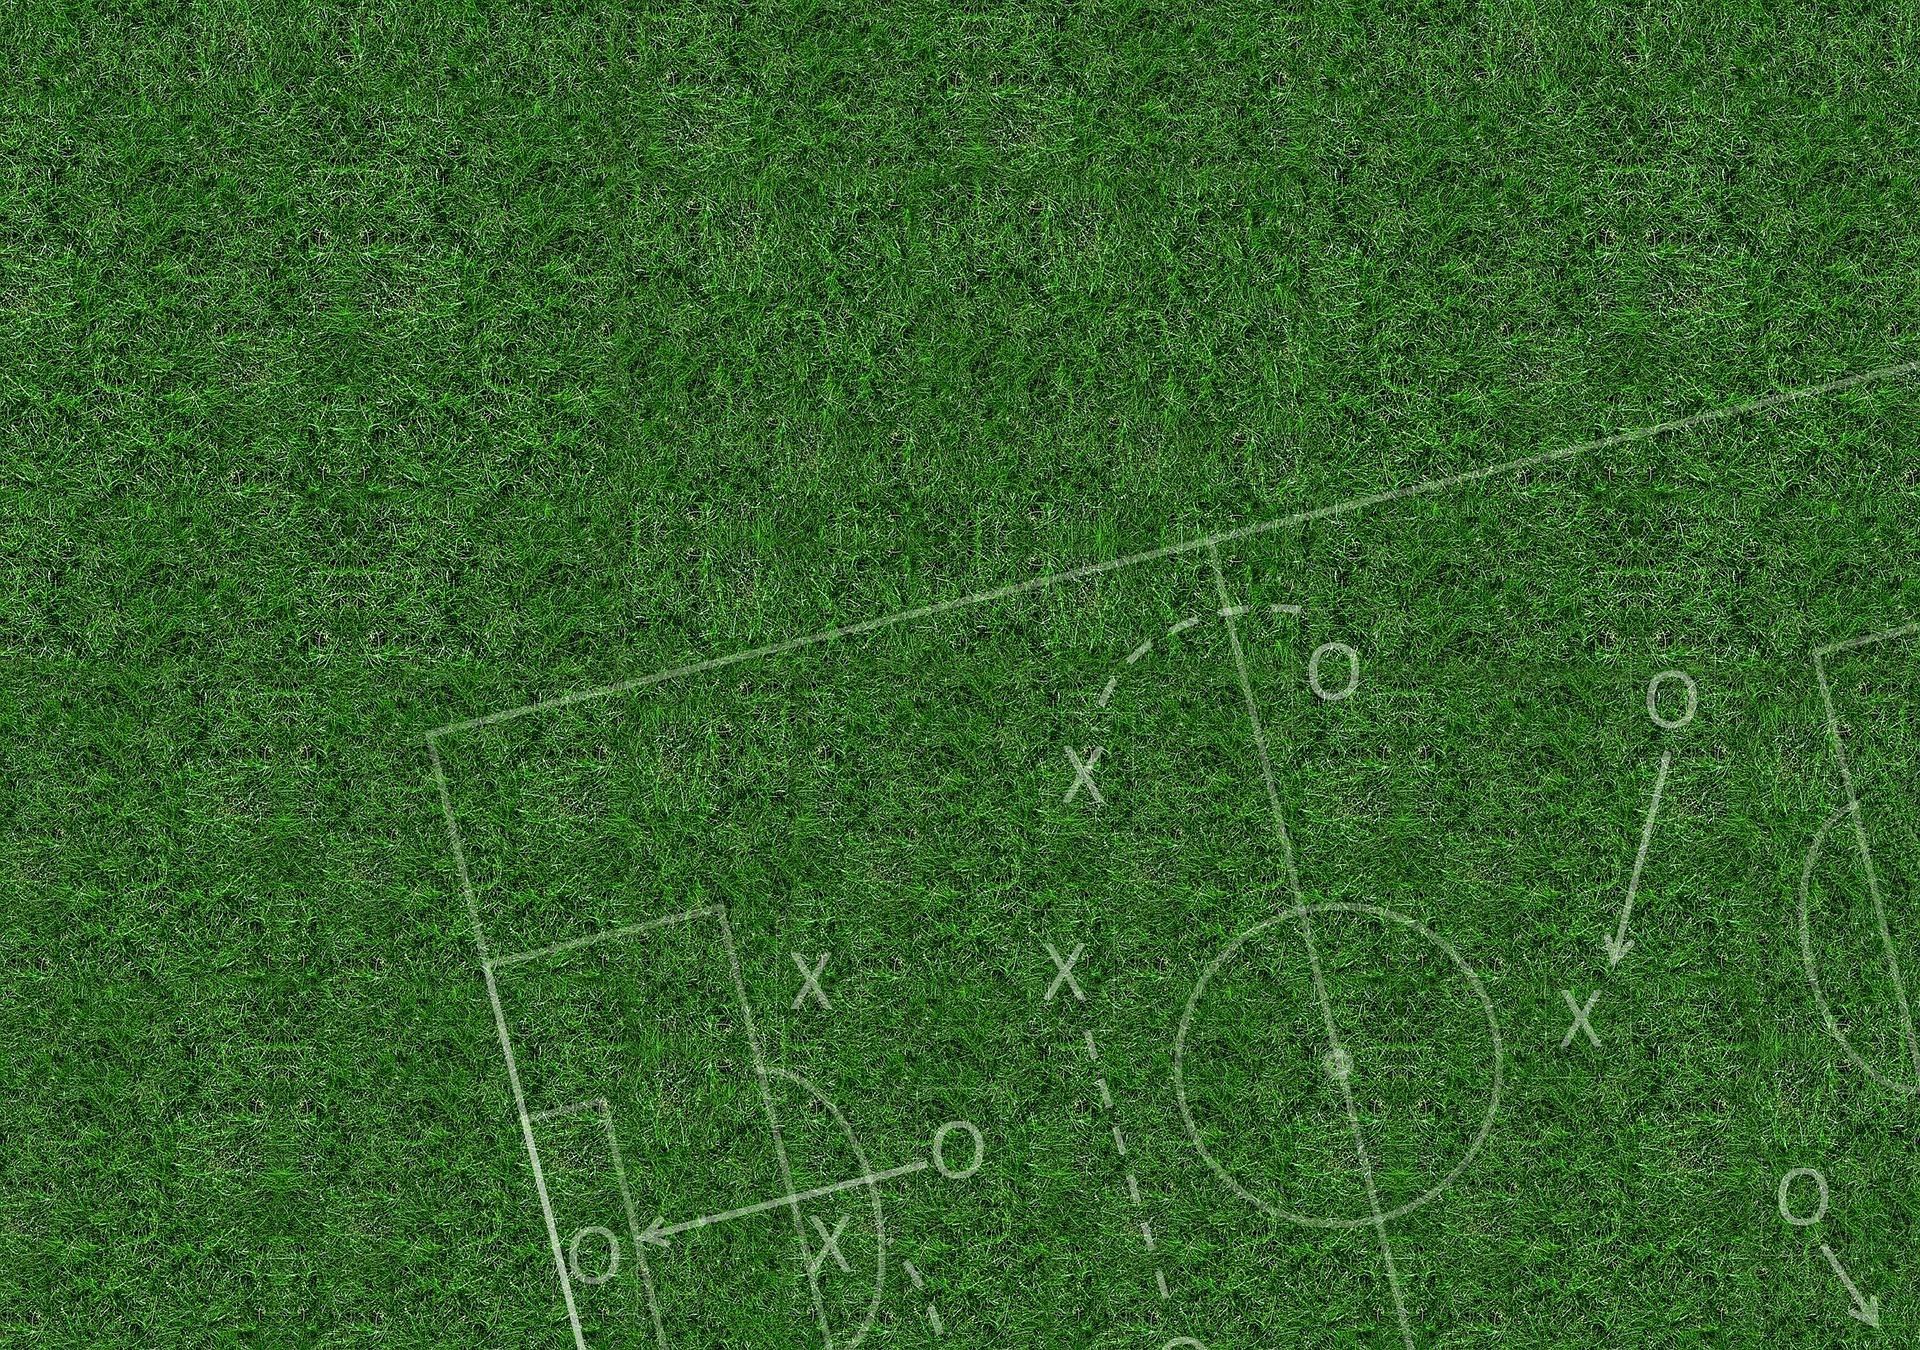 field with whiteboard soccer play overlayed